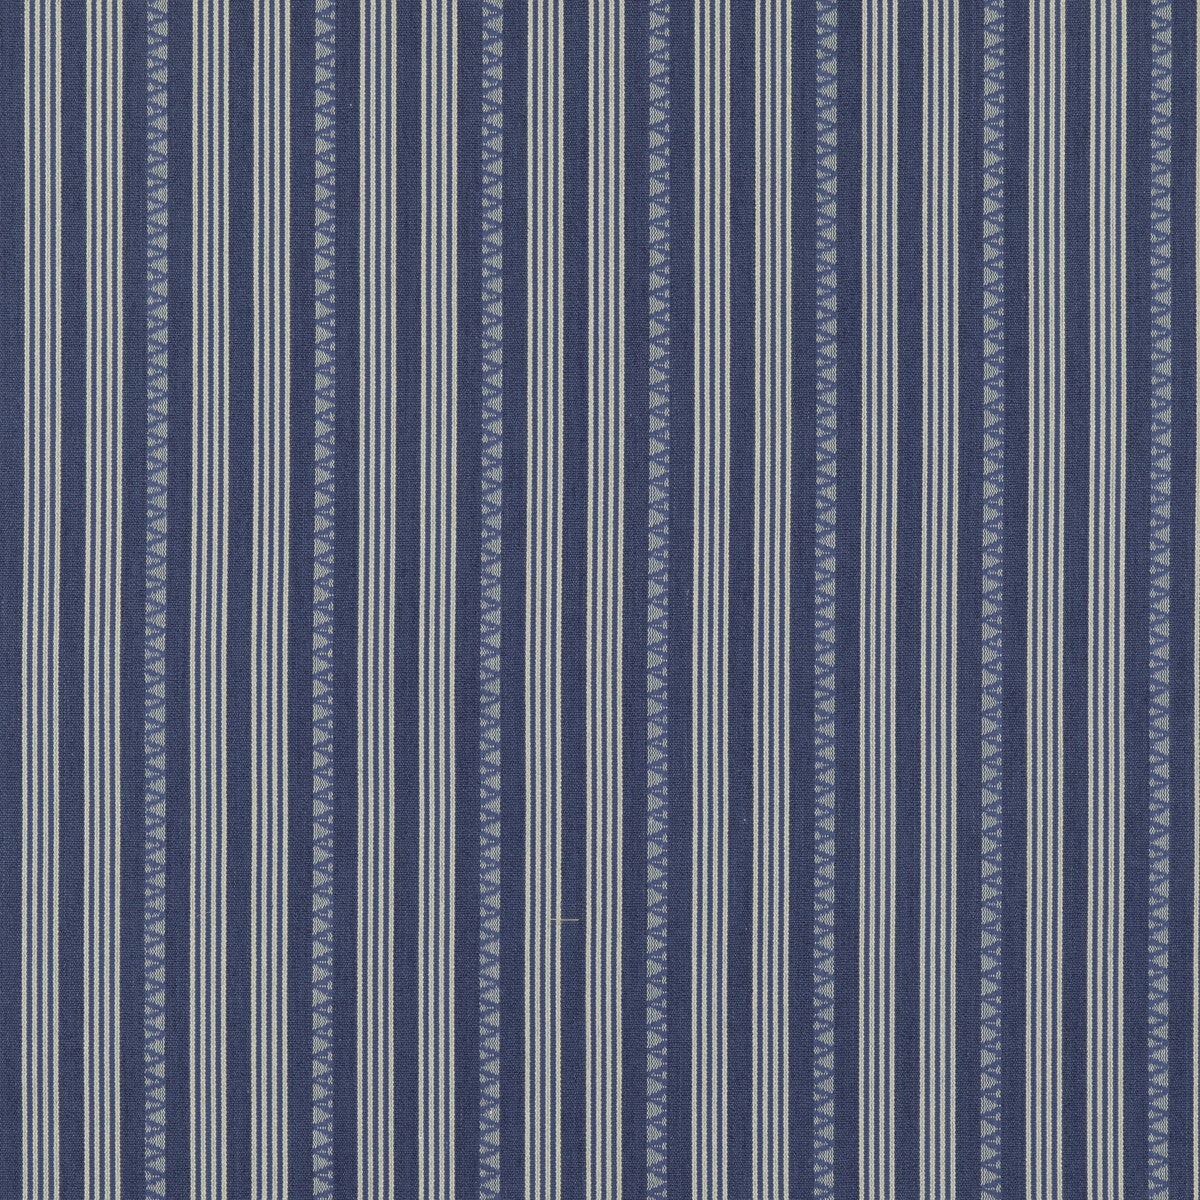 Kilim Stripe fabric in blue color - pattern BF10911.1.0 - by G P &amp; J Baker in the Portobello collection